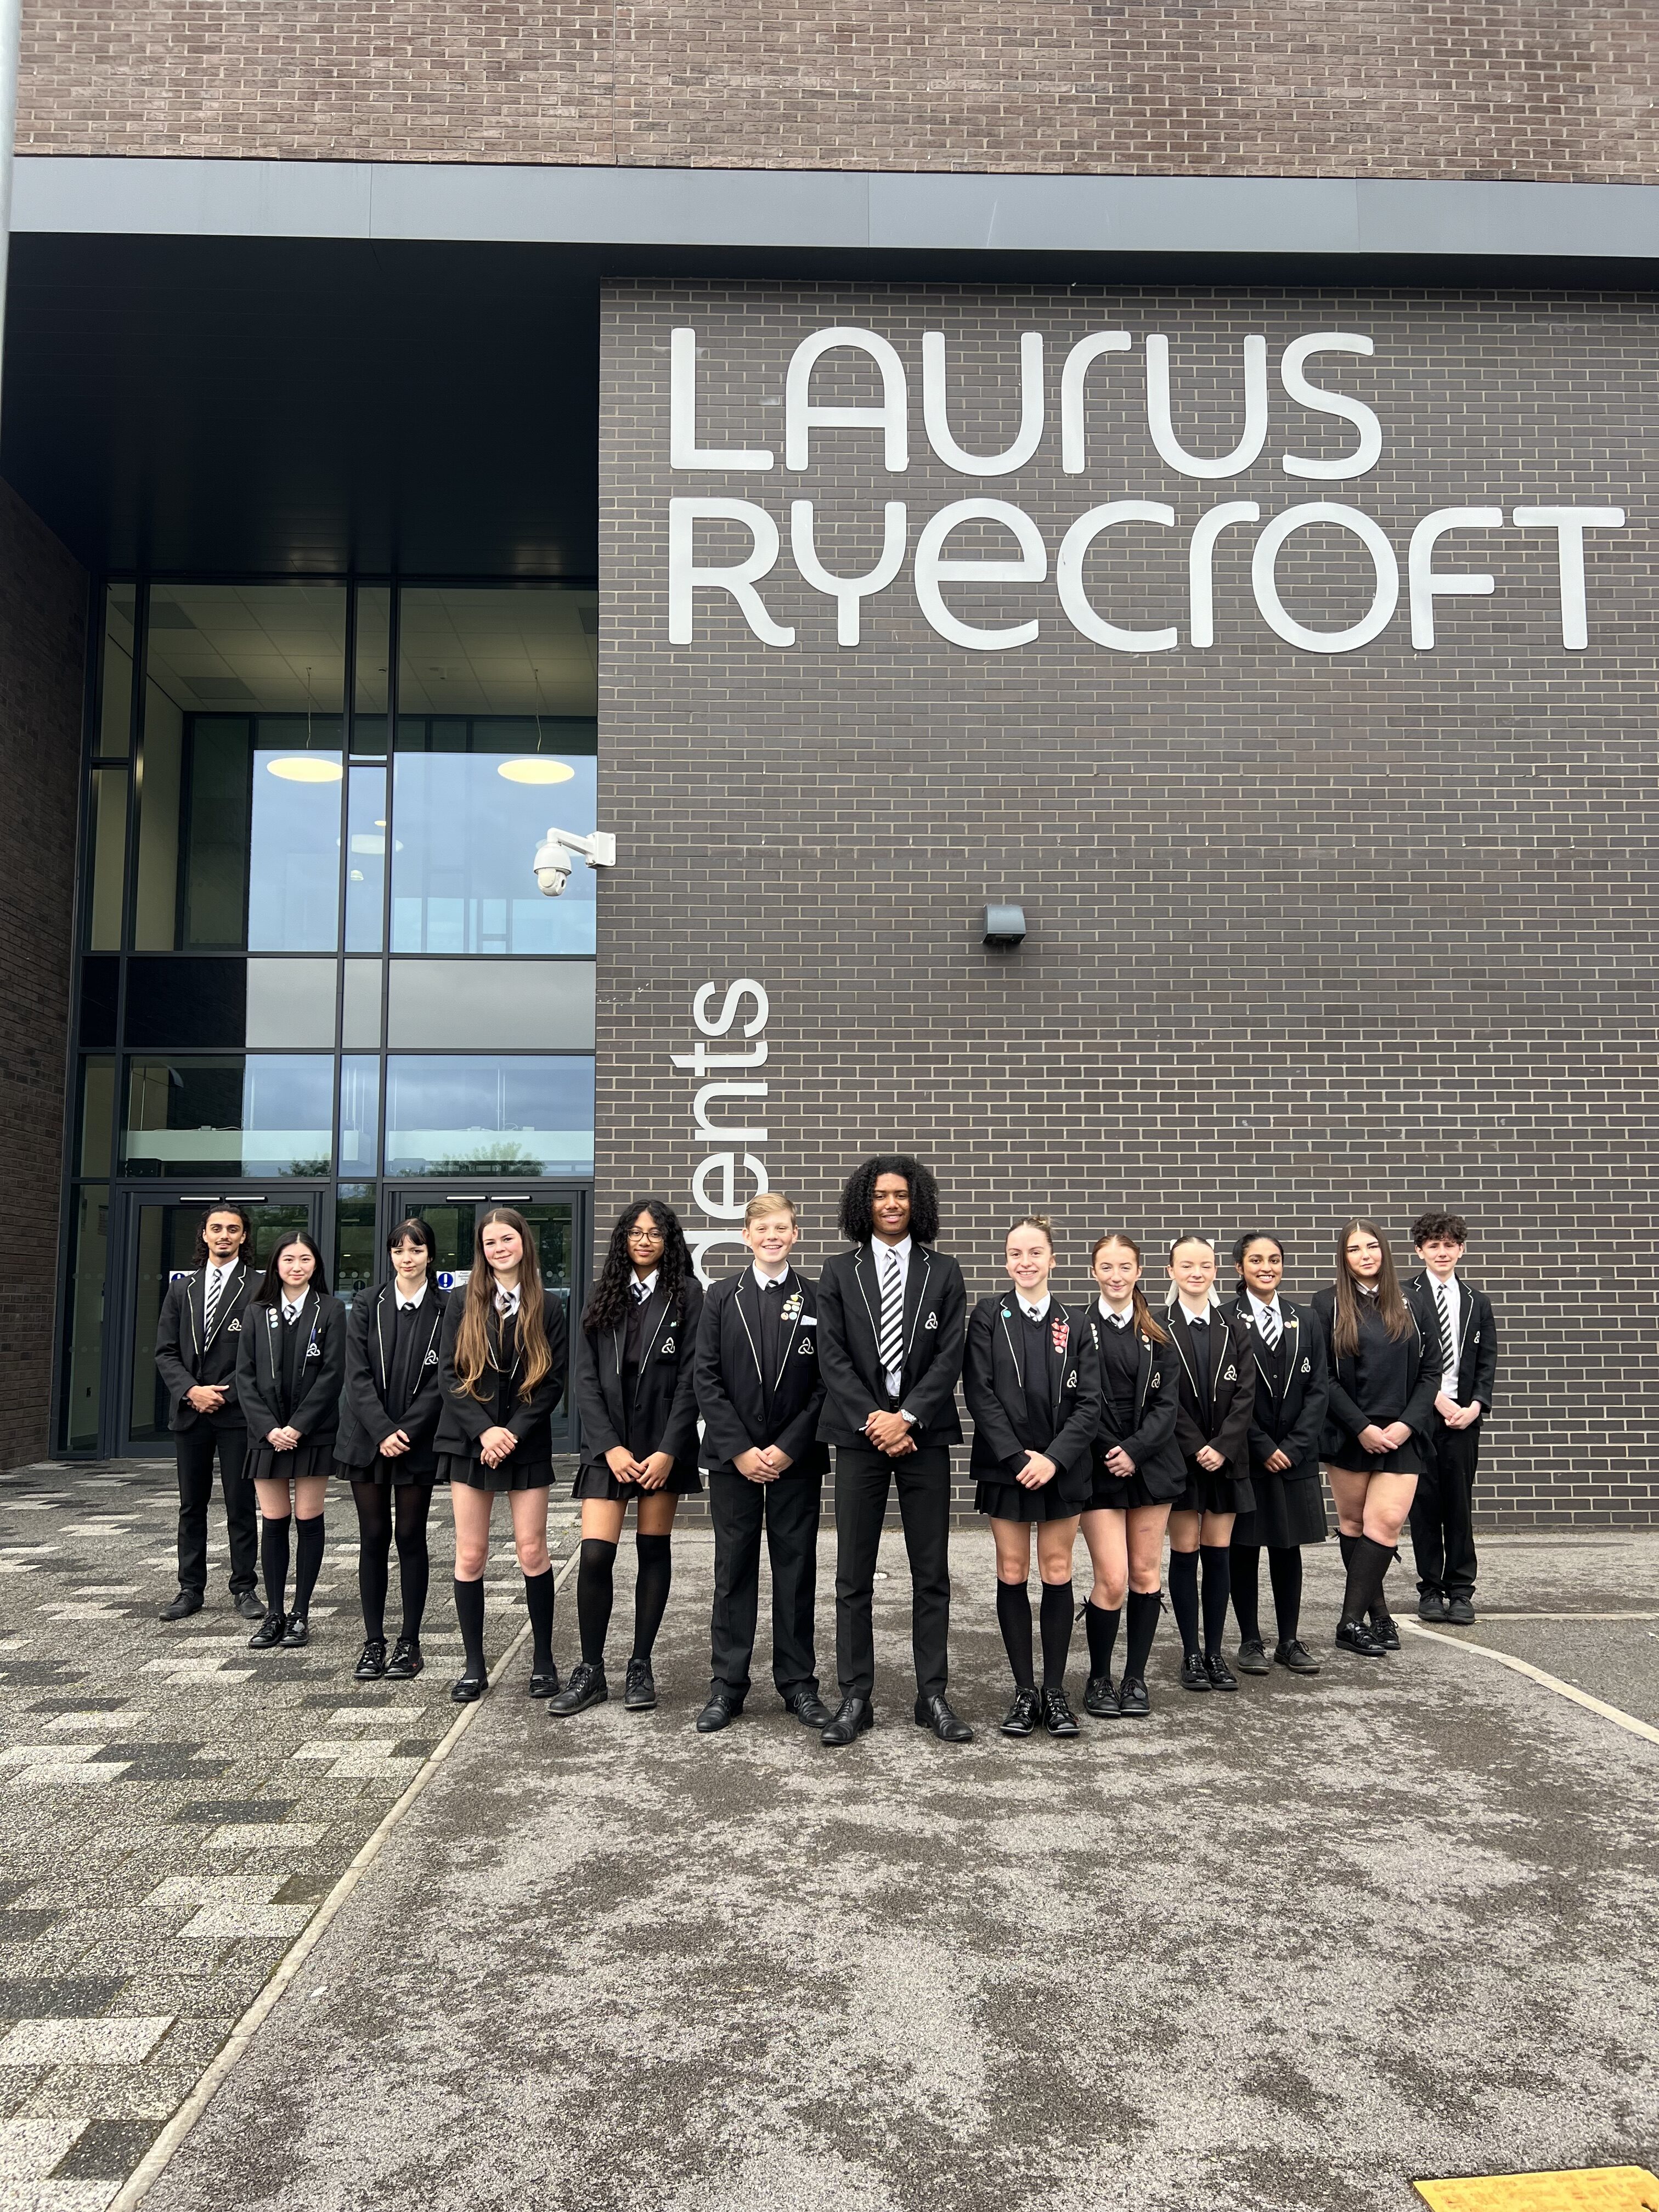 Laurus Ryecroft students stand in formation outside the school building